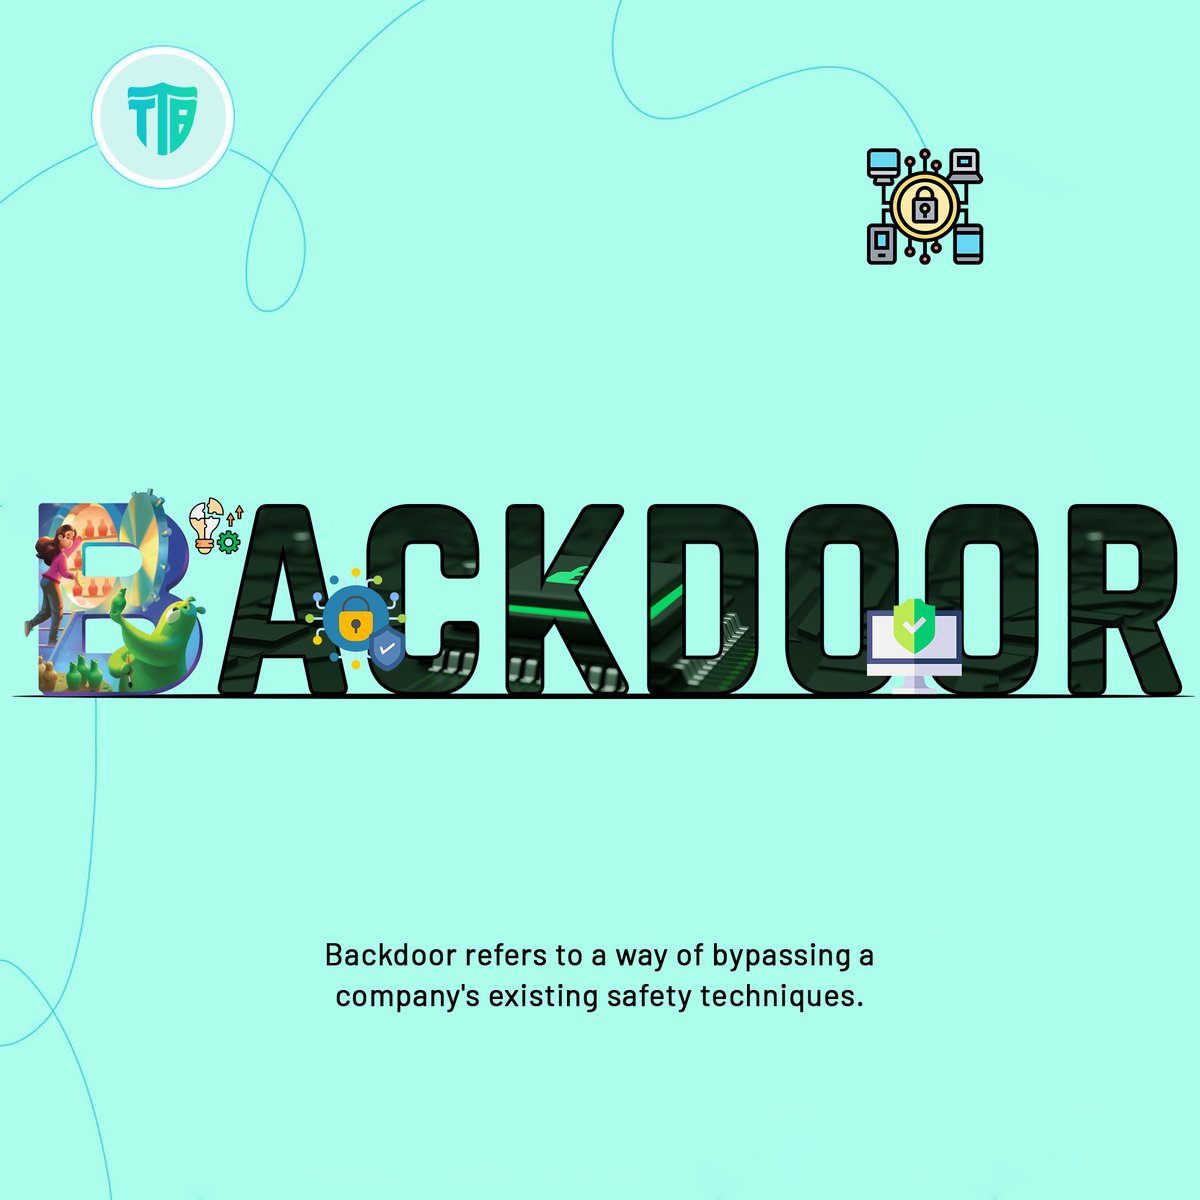 Today we discuss about 'Backdoor'

A Backdoor is defined as the type of malware attack in which cyber attackers form or employ a backdoor to gain remote access to a system. 

#Backdoor #Cybersecurity  #ttbinternetsecurity #Exploitation #SecurityRisk #ttbantivirus #DataBreach